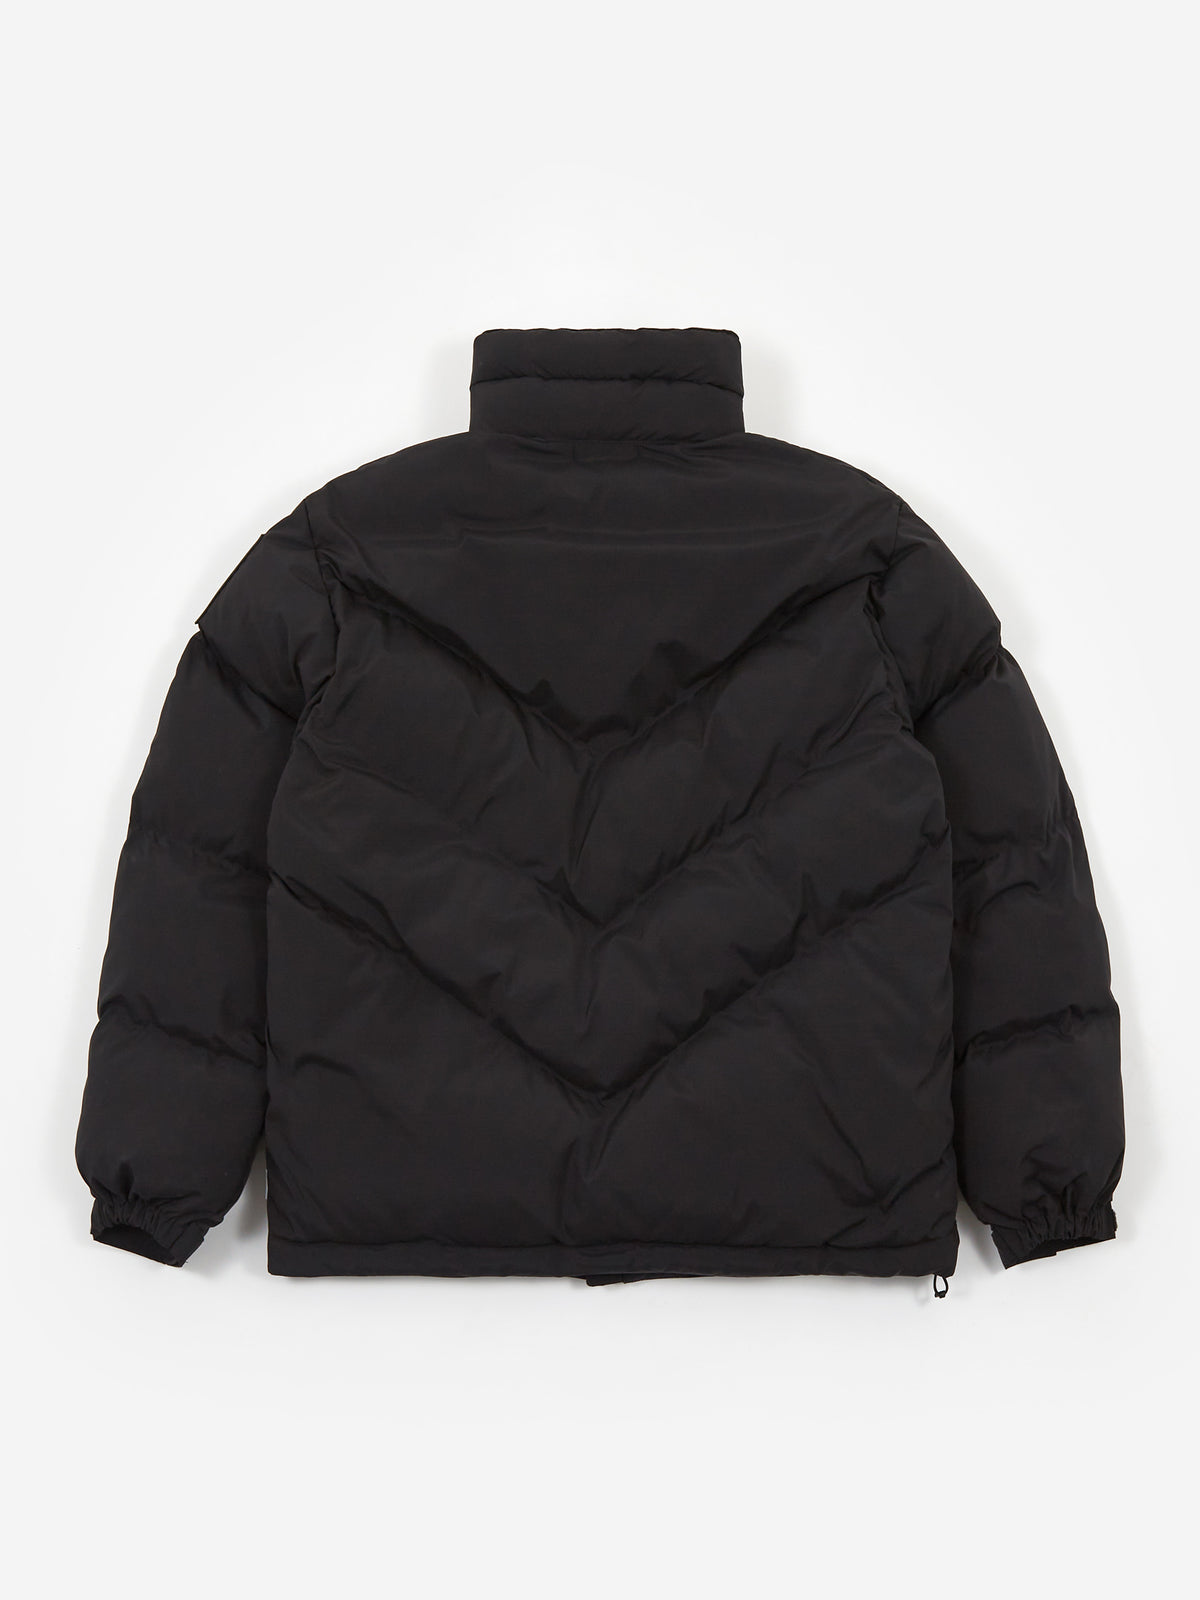 Shop online for the latest WTAPS TTL / Jacket / Poly. Taffeta 